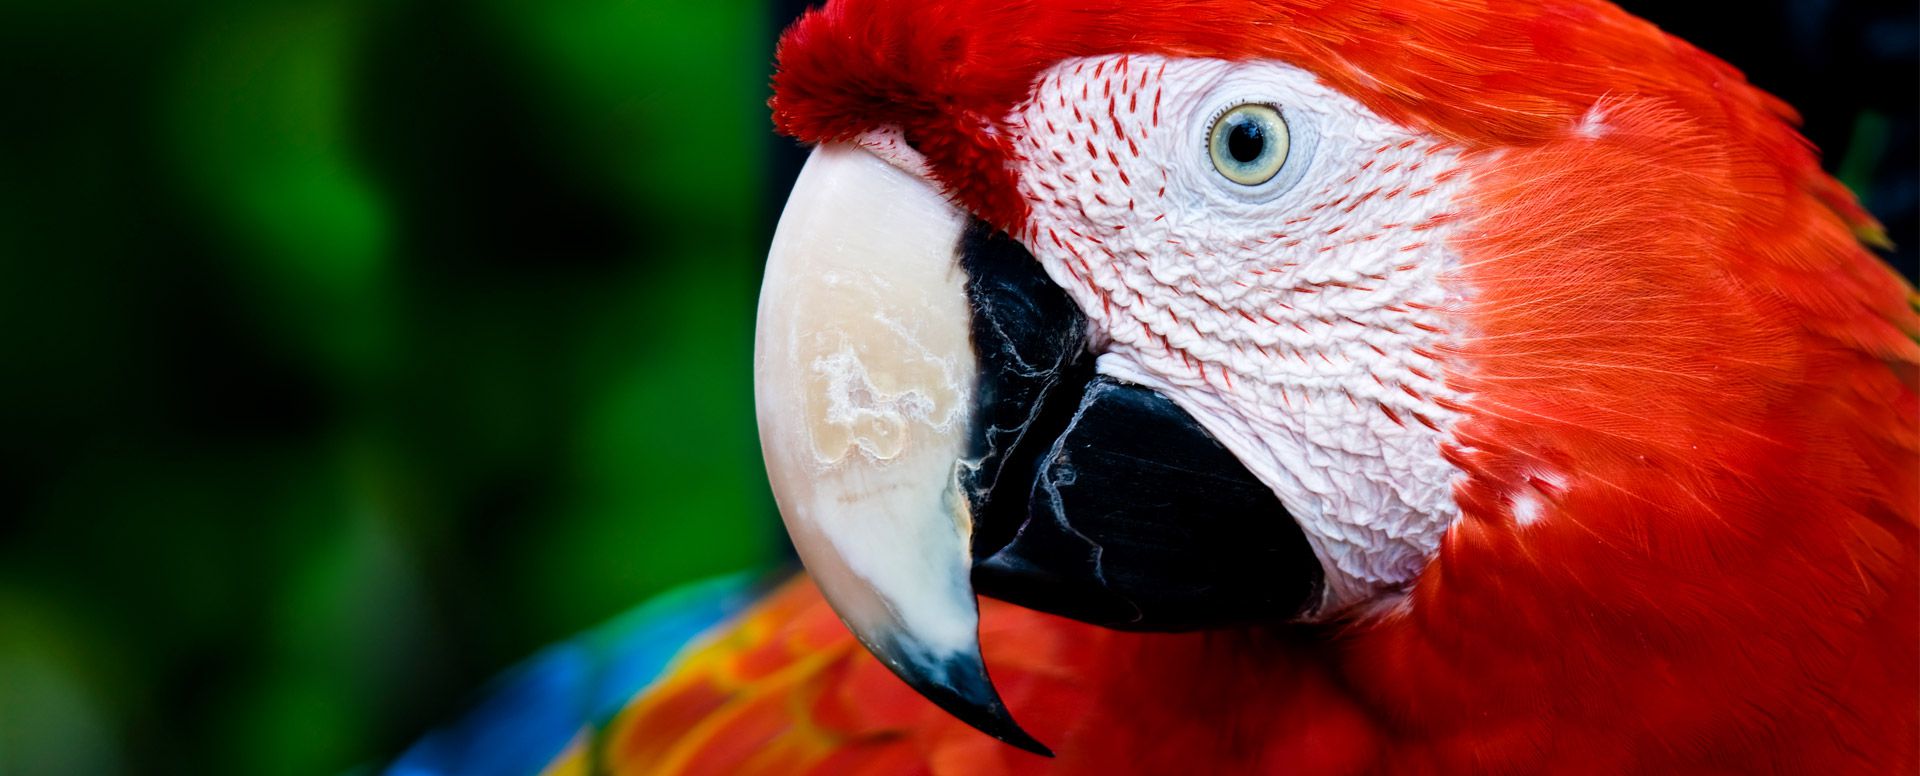 HQ Scarlet Macaw Wallpapers | File 158.99Kb